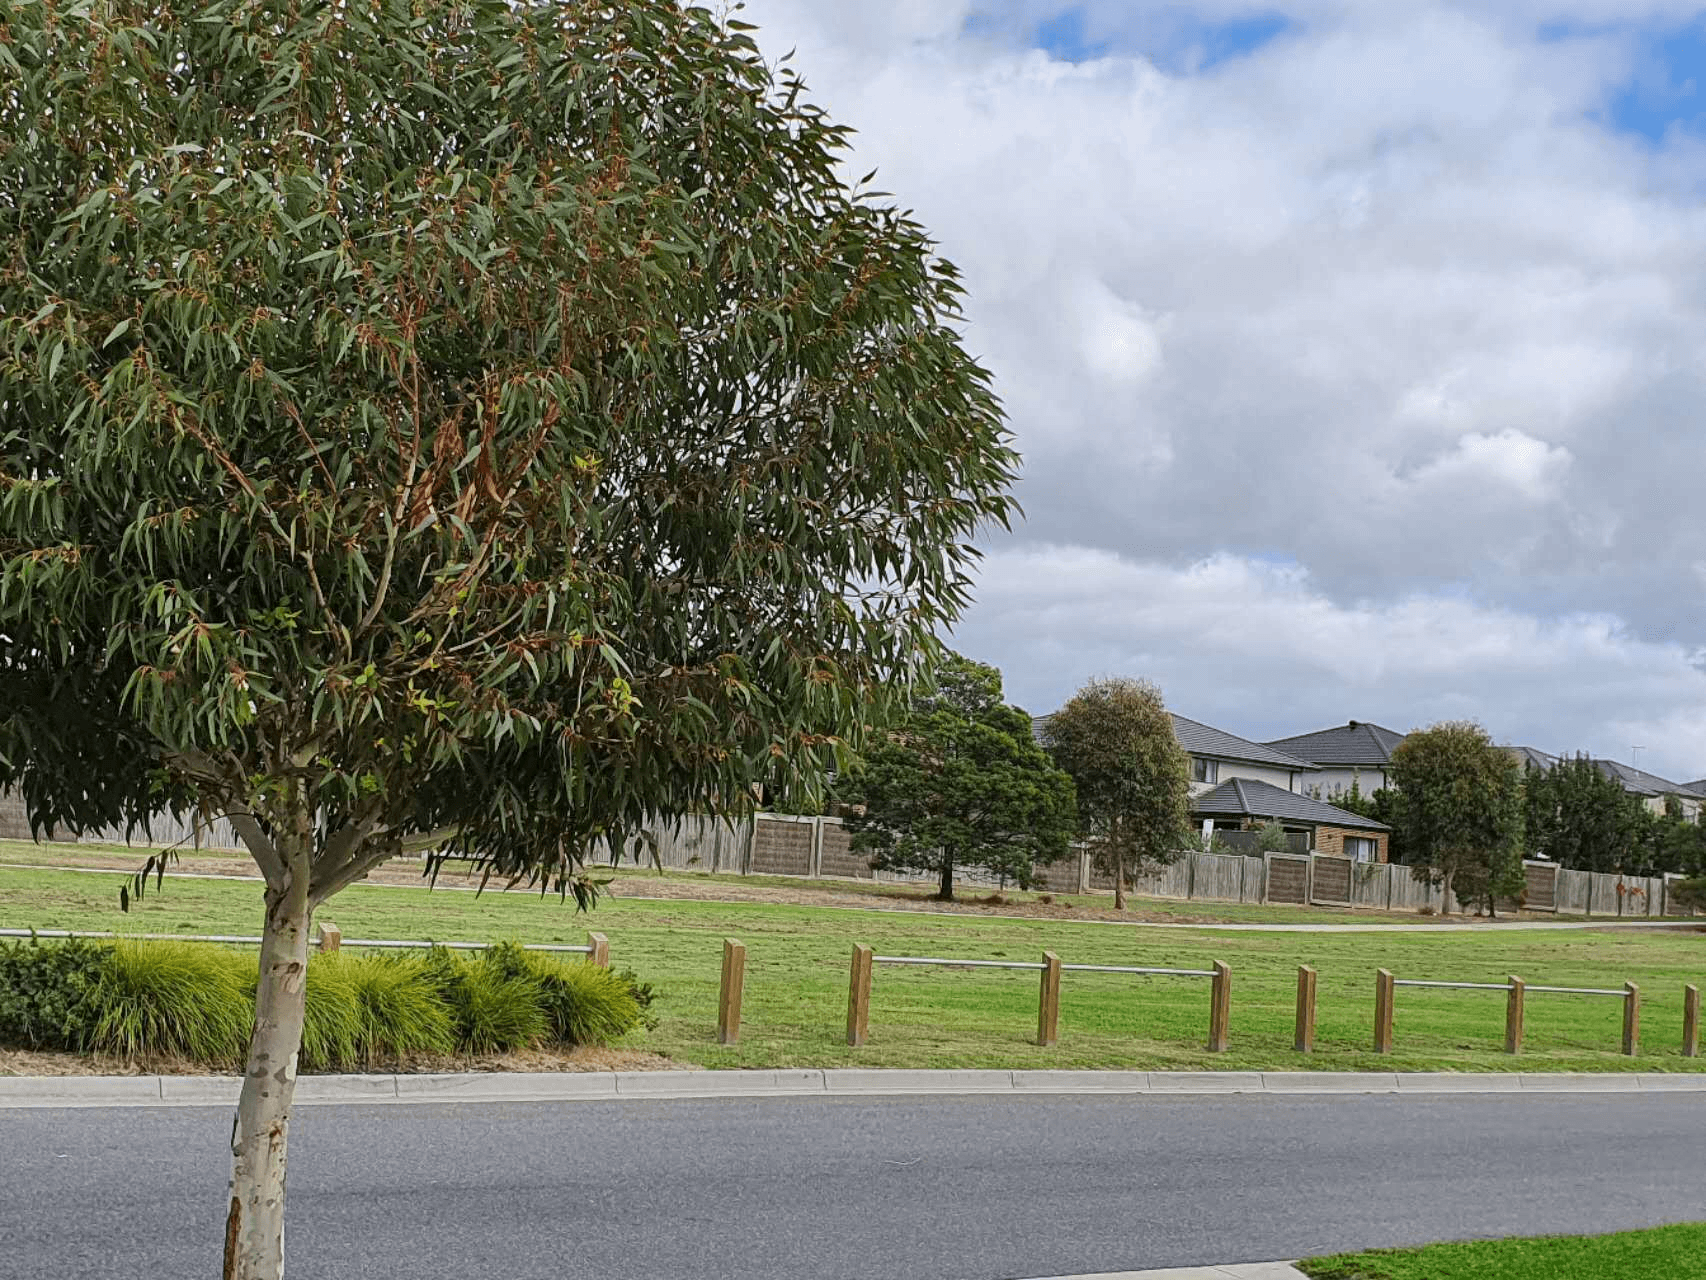 12 Greenslate Street, Clyde North, VIC 3978